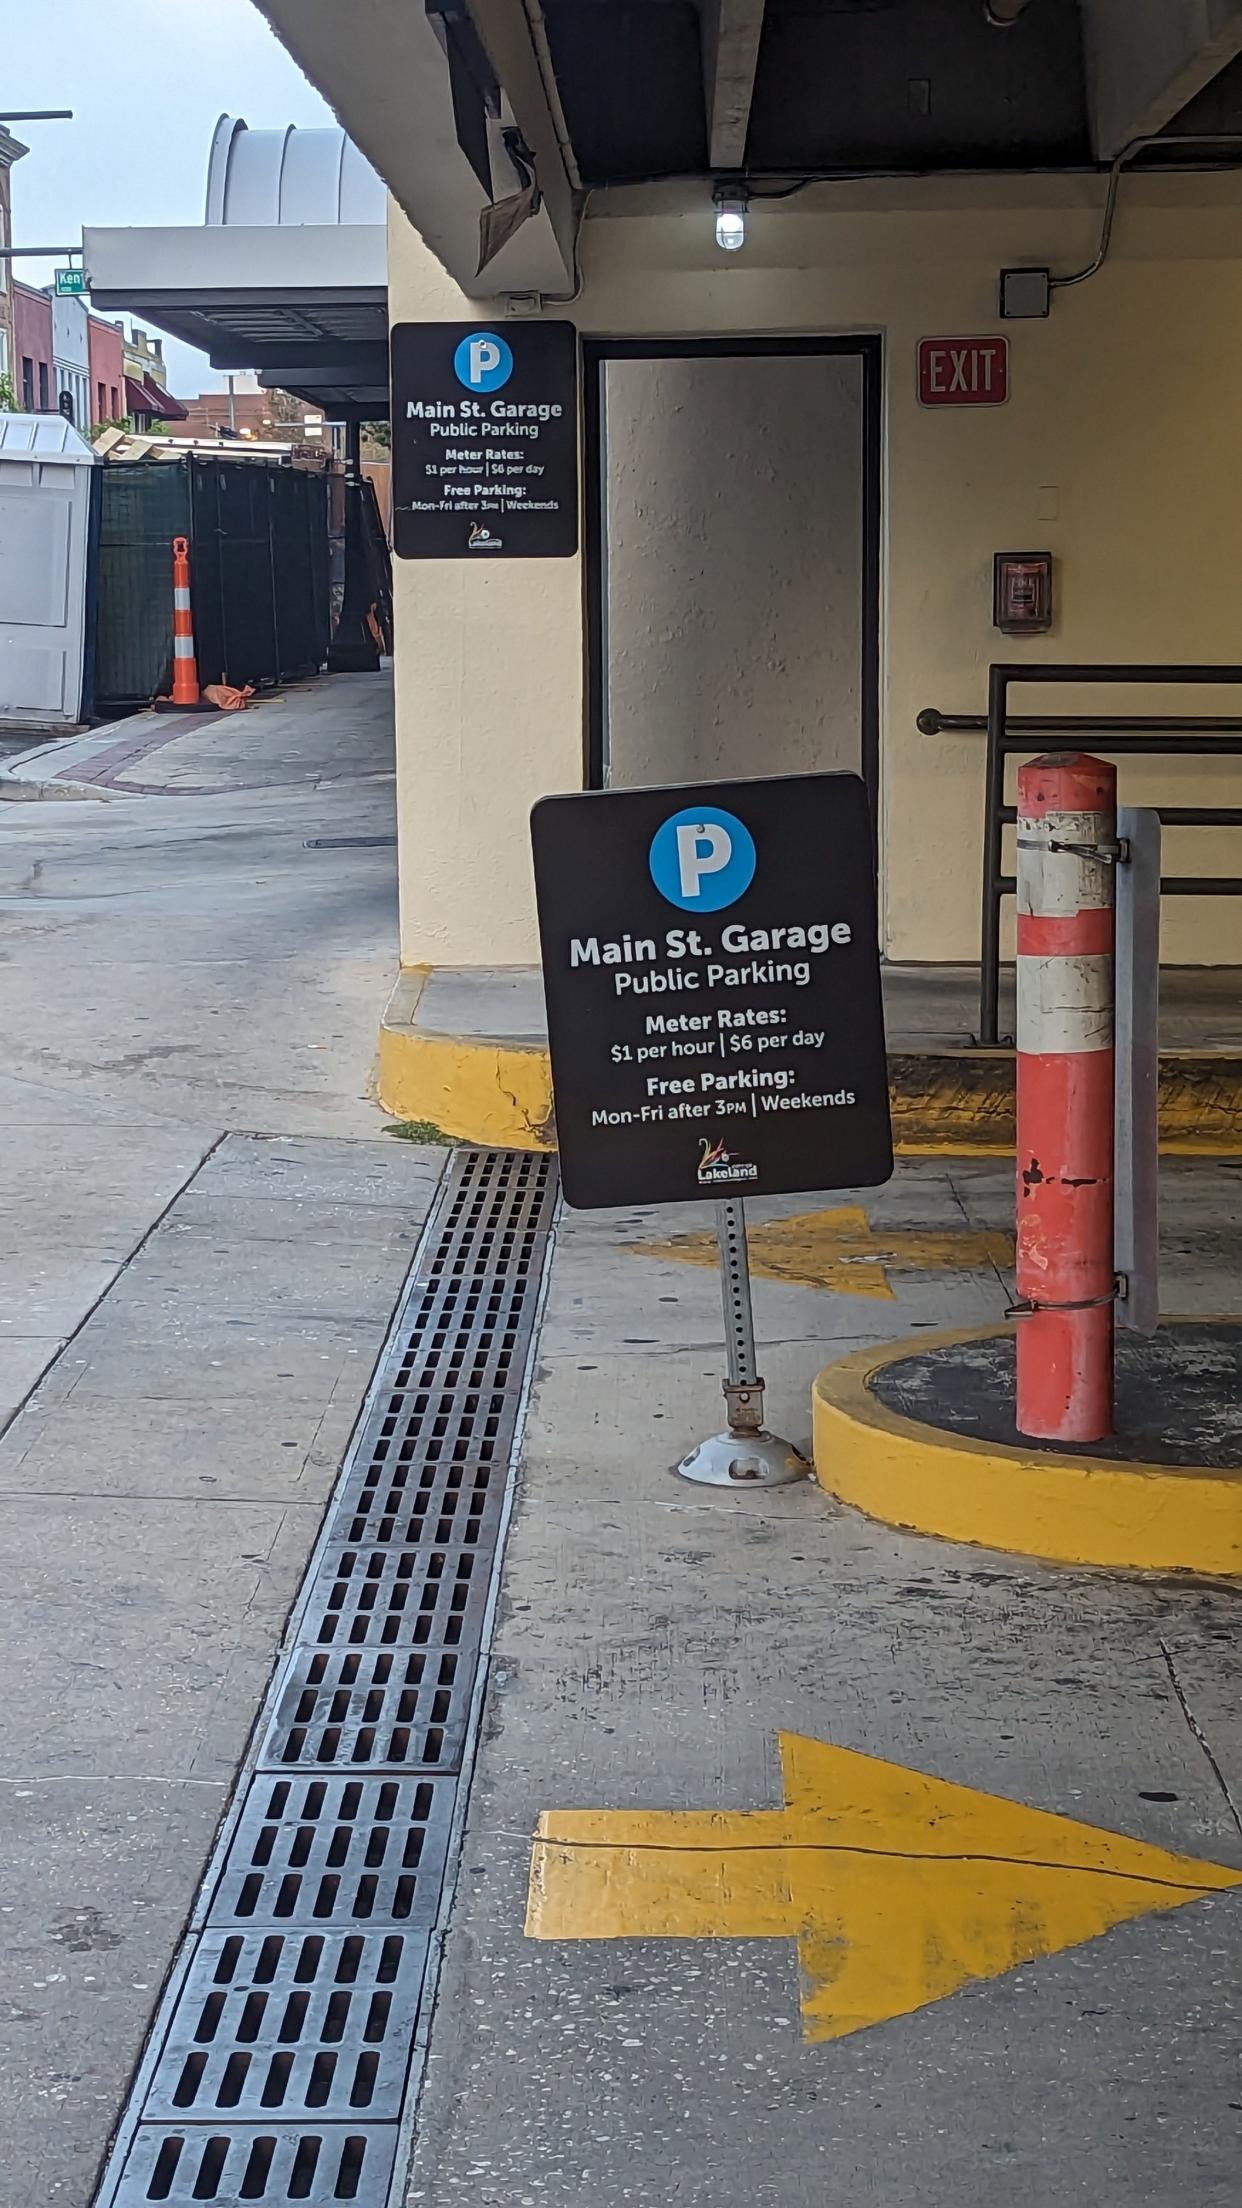 Lakeland's Main Street Garage has recently received new signage as it has been opened up for public metered parking, according to Traffic Operations Manager Tess Schwartz.